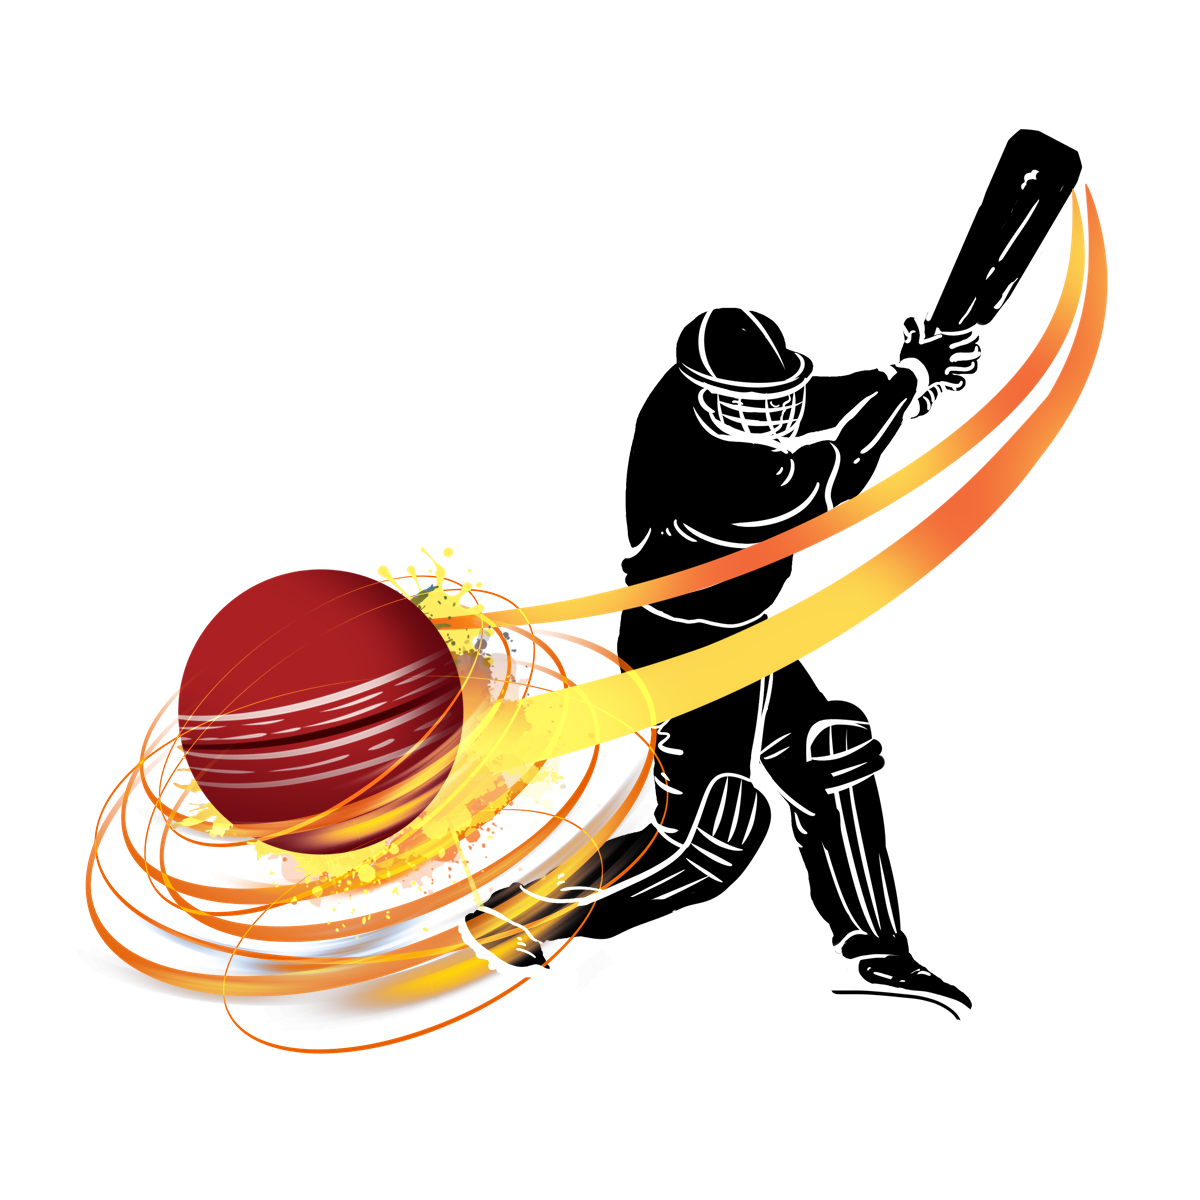 Bitcoin Cricket Betting Sites 2022 - Start Your Safe BTC Cricket Bets